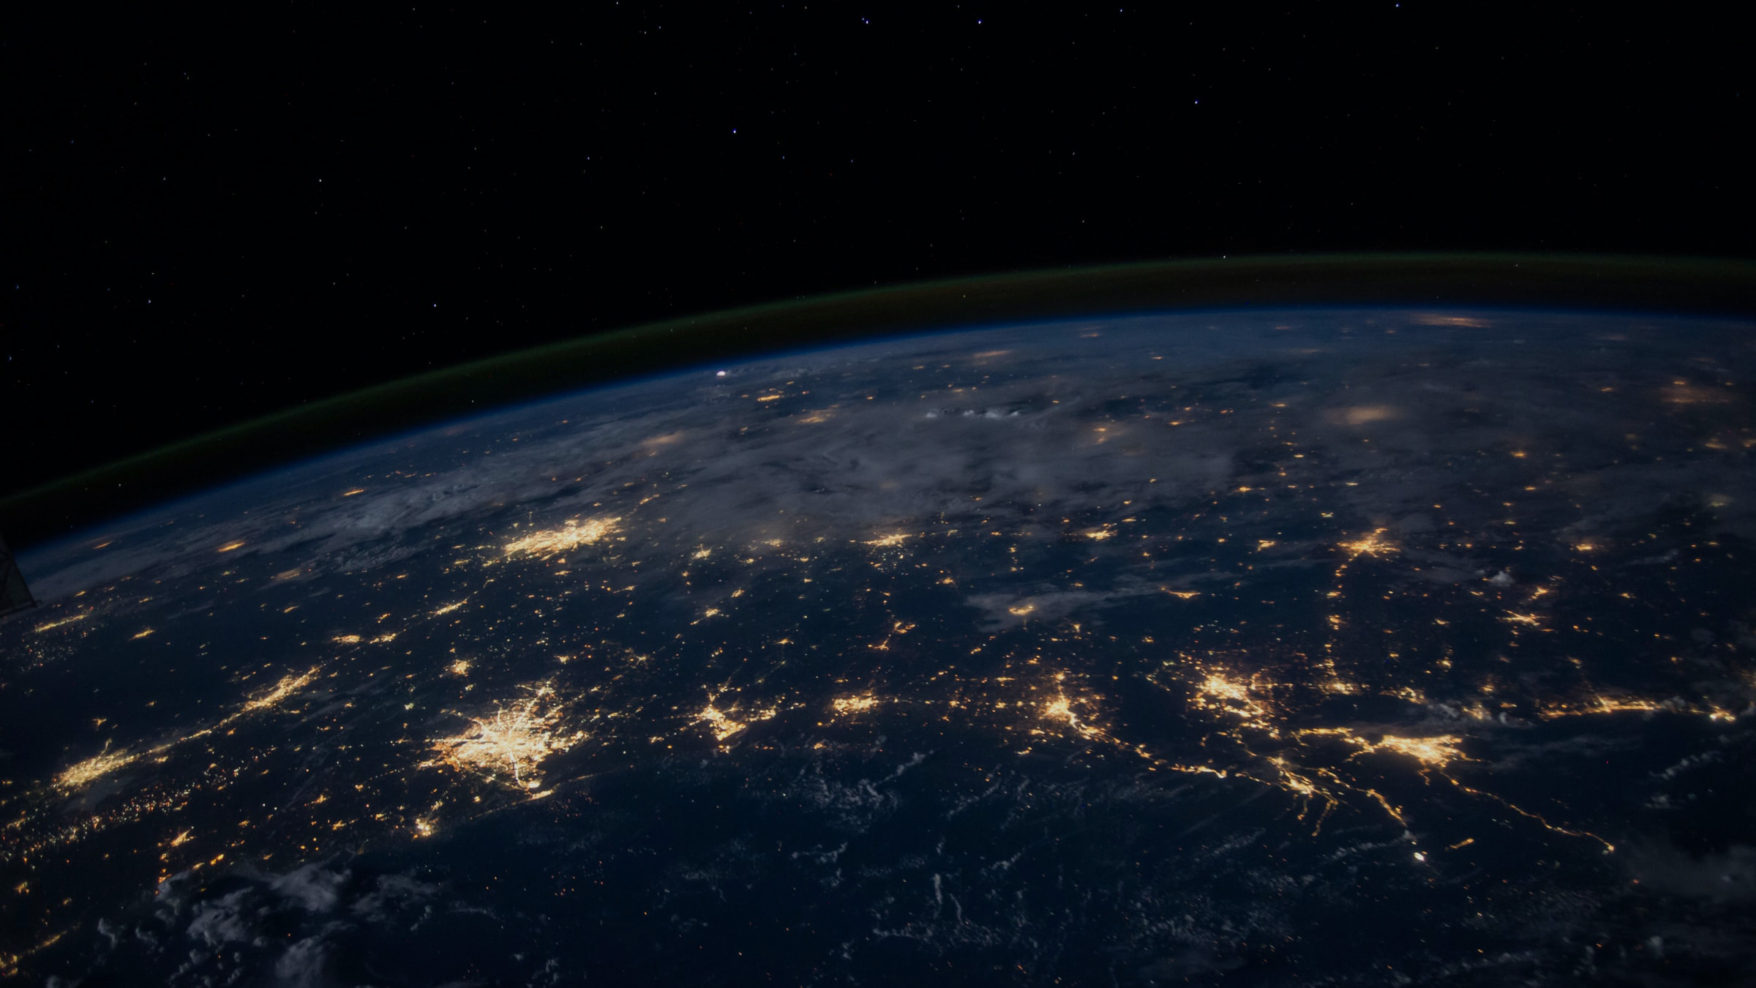 Night photograph of the Earth from space with lights indicating larger populated areas of the globe